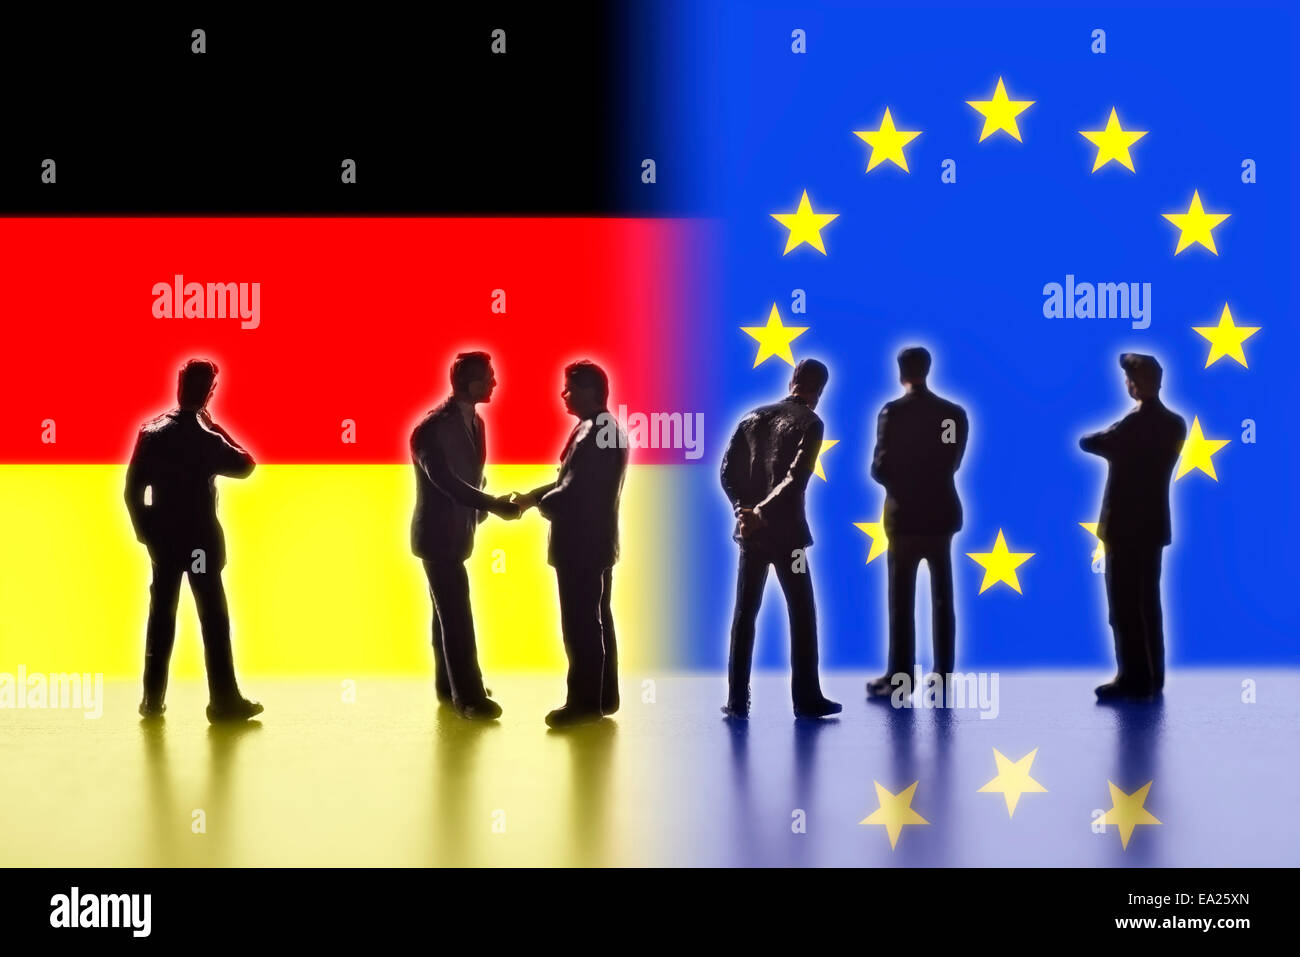 Model figures symbolizing politicians are facing the flags of Europe and Germany. Two of them shake hands. Stock Photo